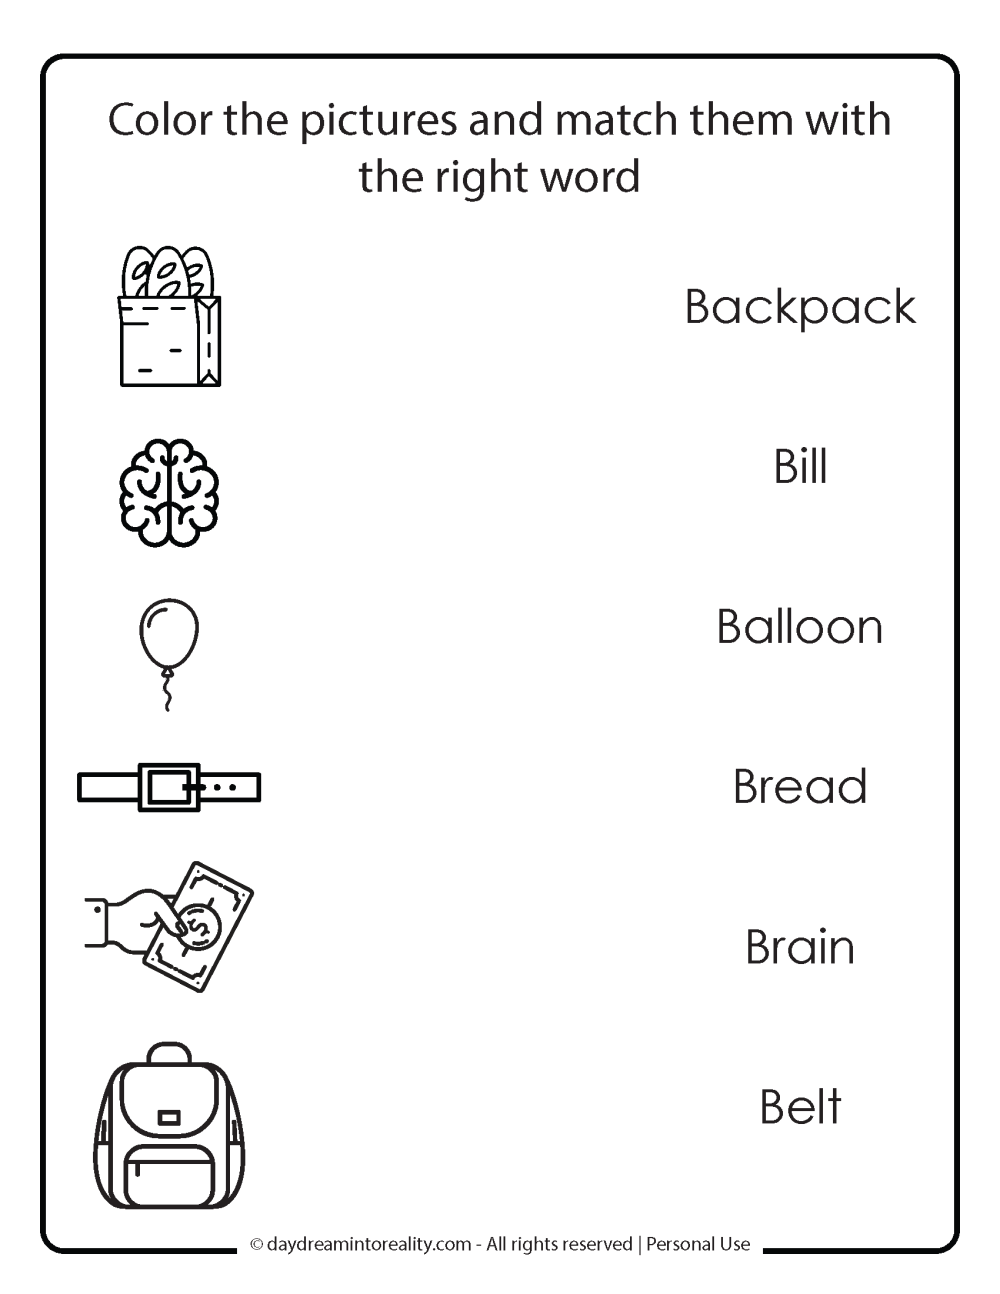 color and match words that start with B free printable worksheet